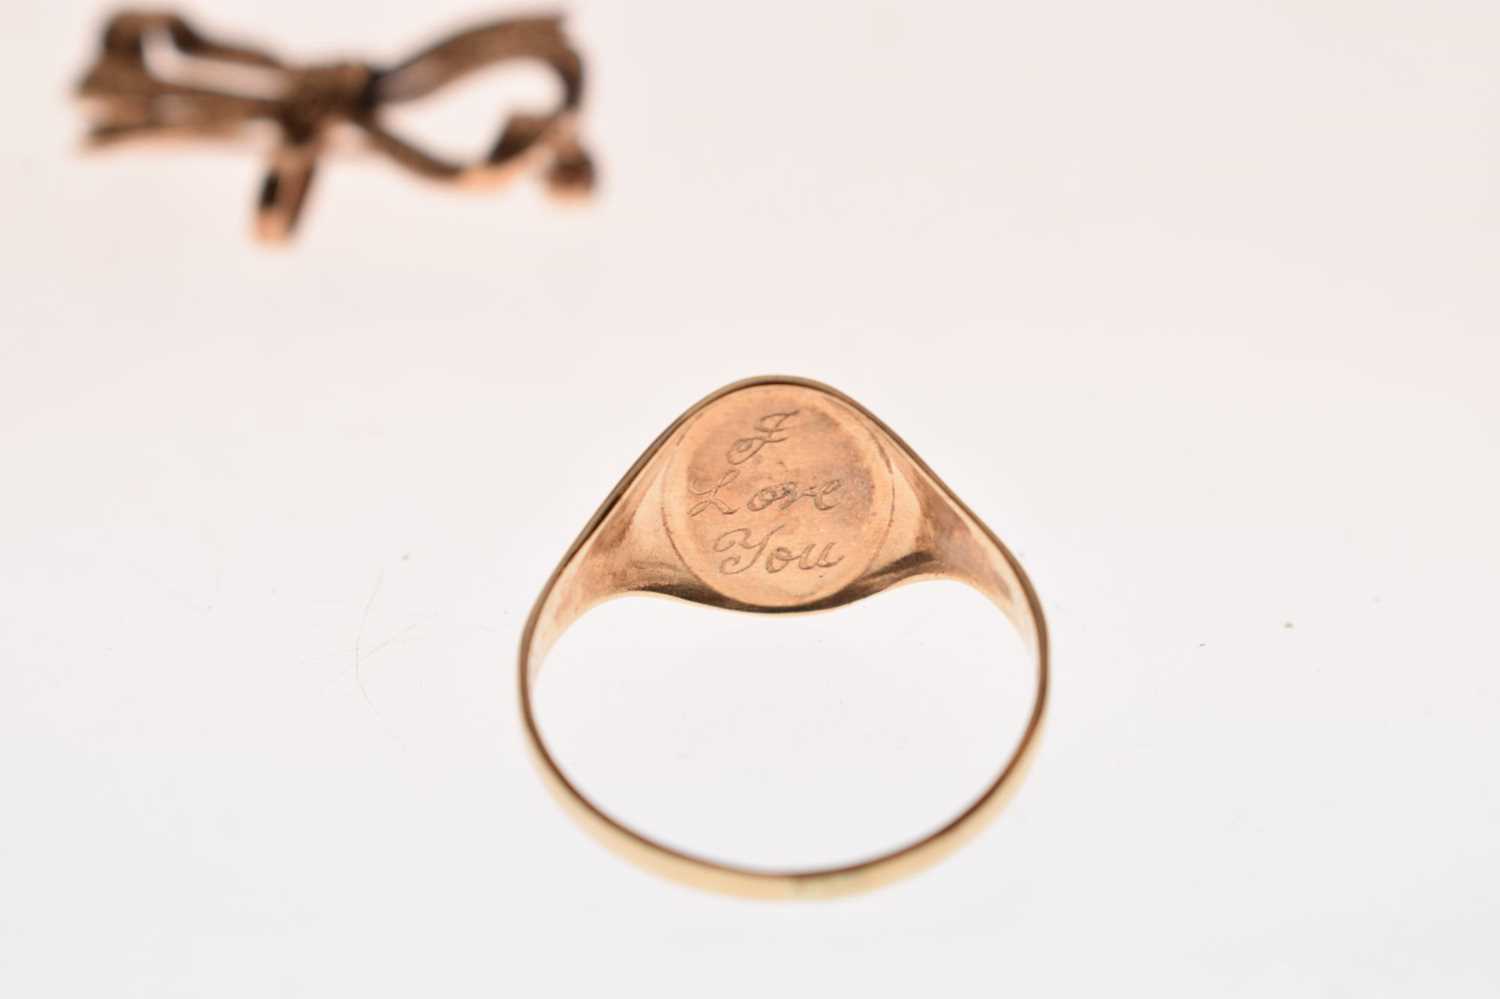 9ct gold half-engraved oval signet ring - Image 3 of 7